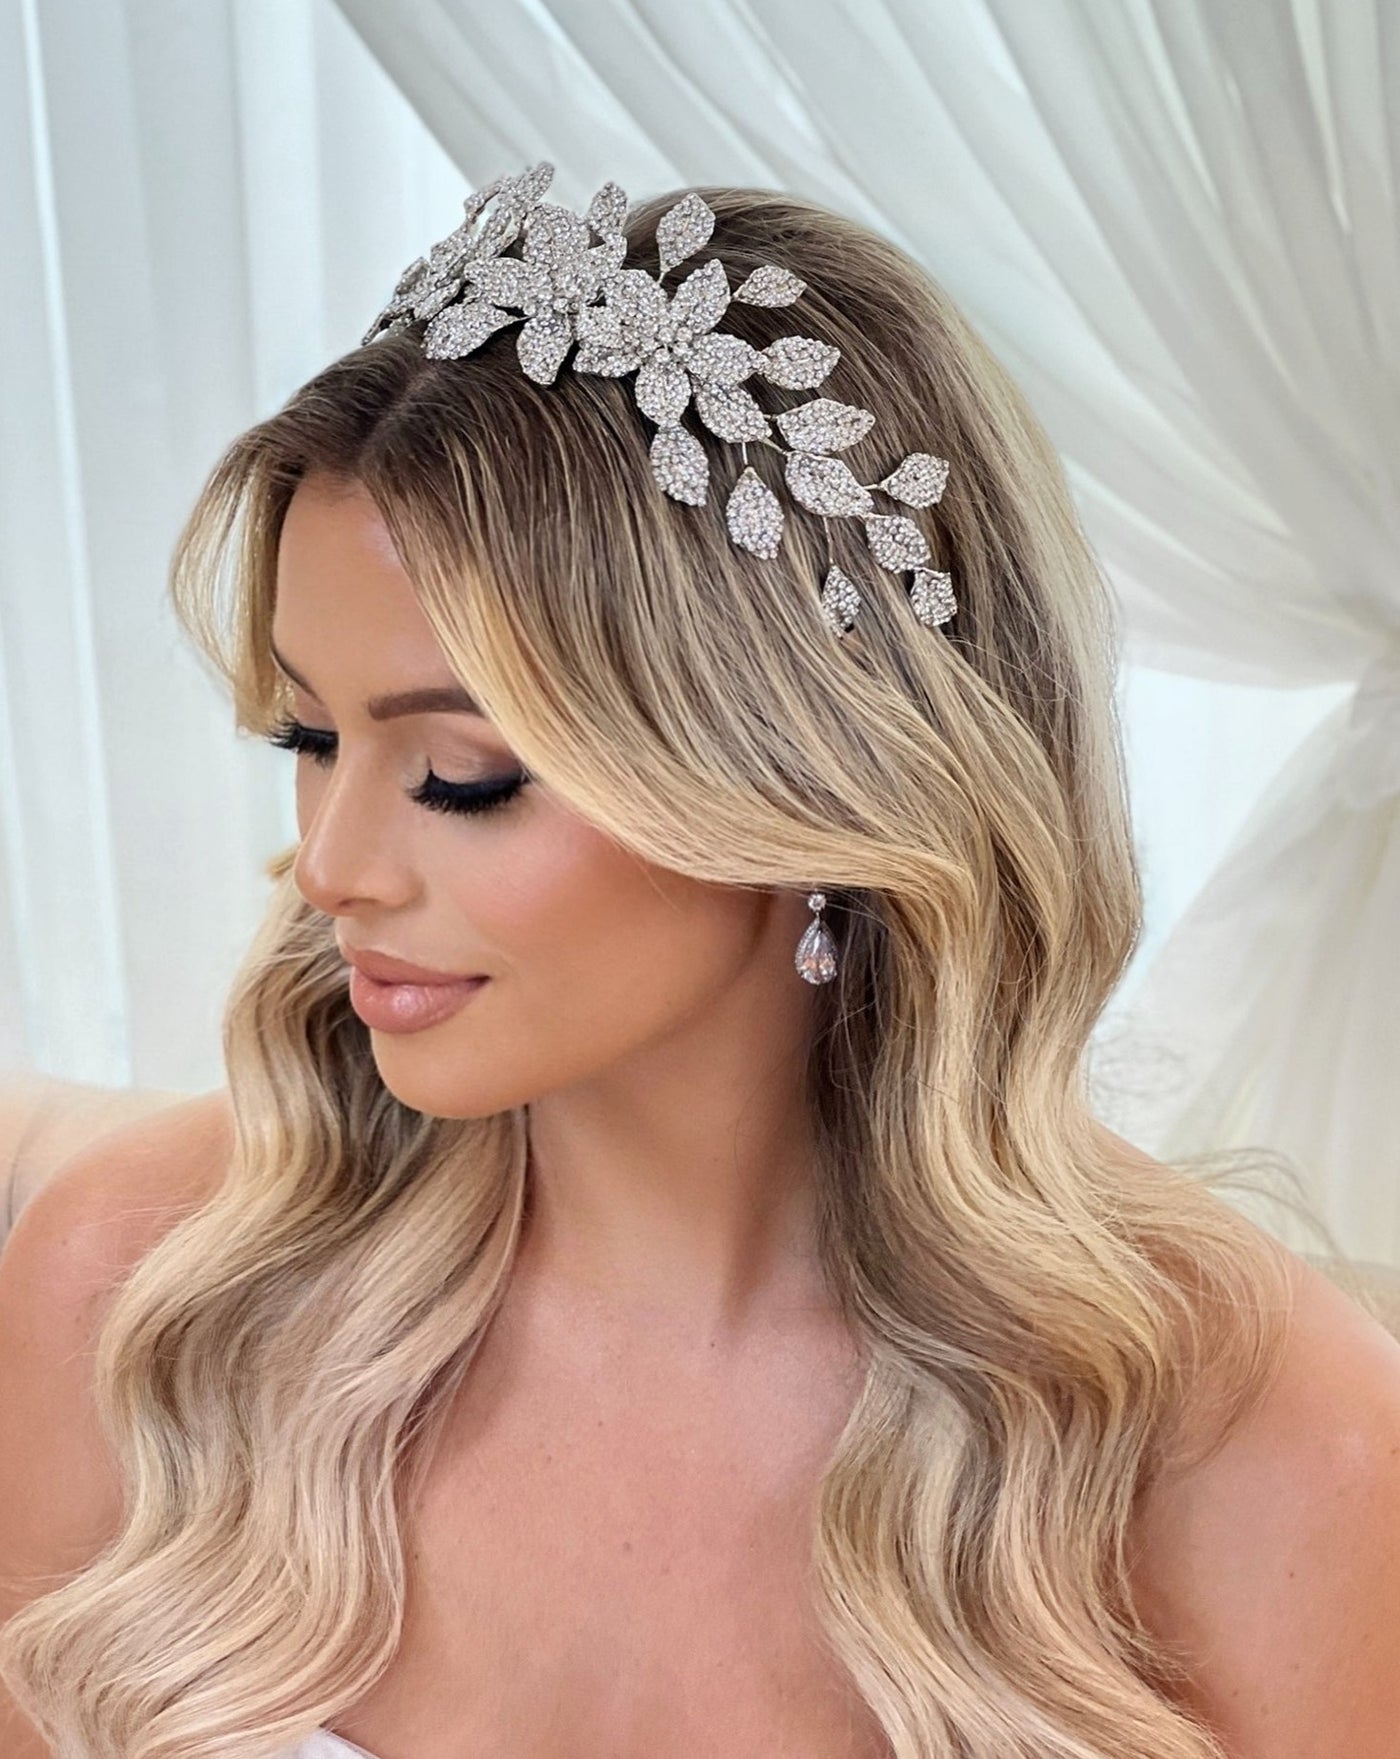 female model wearing silver bridal headband with crystalized flowers and leaves